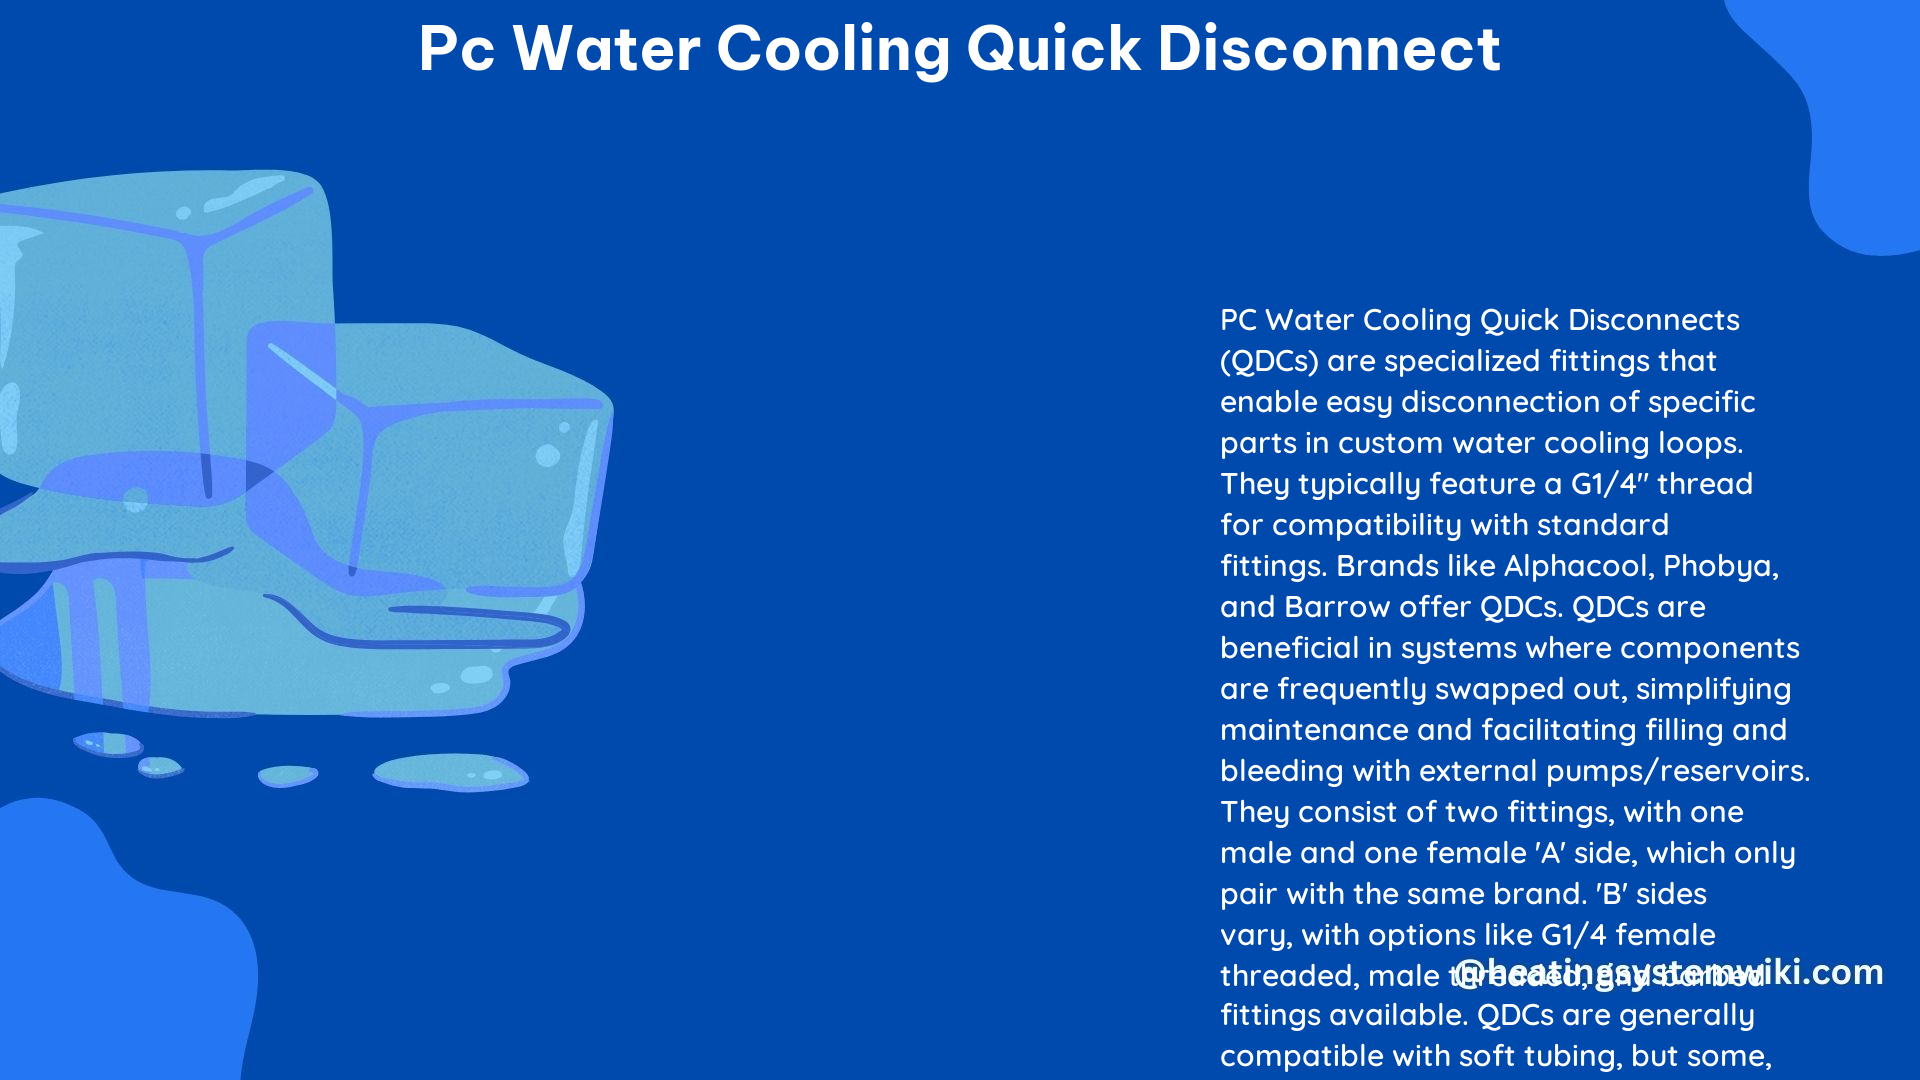 PC Water Cooling Quick Disconnect